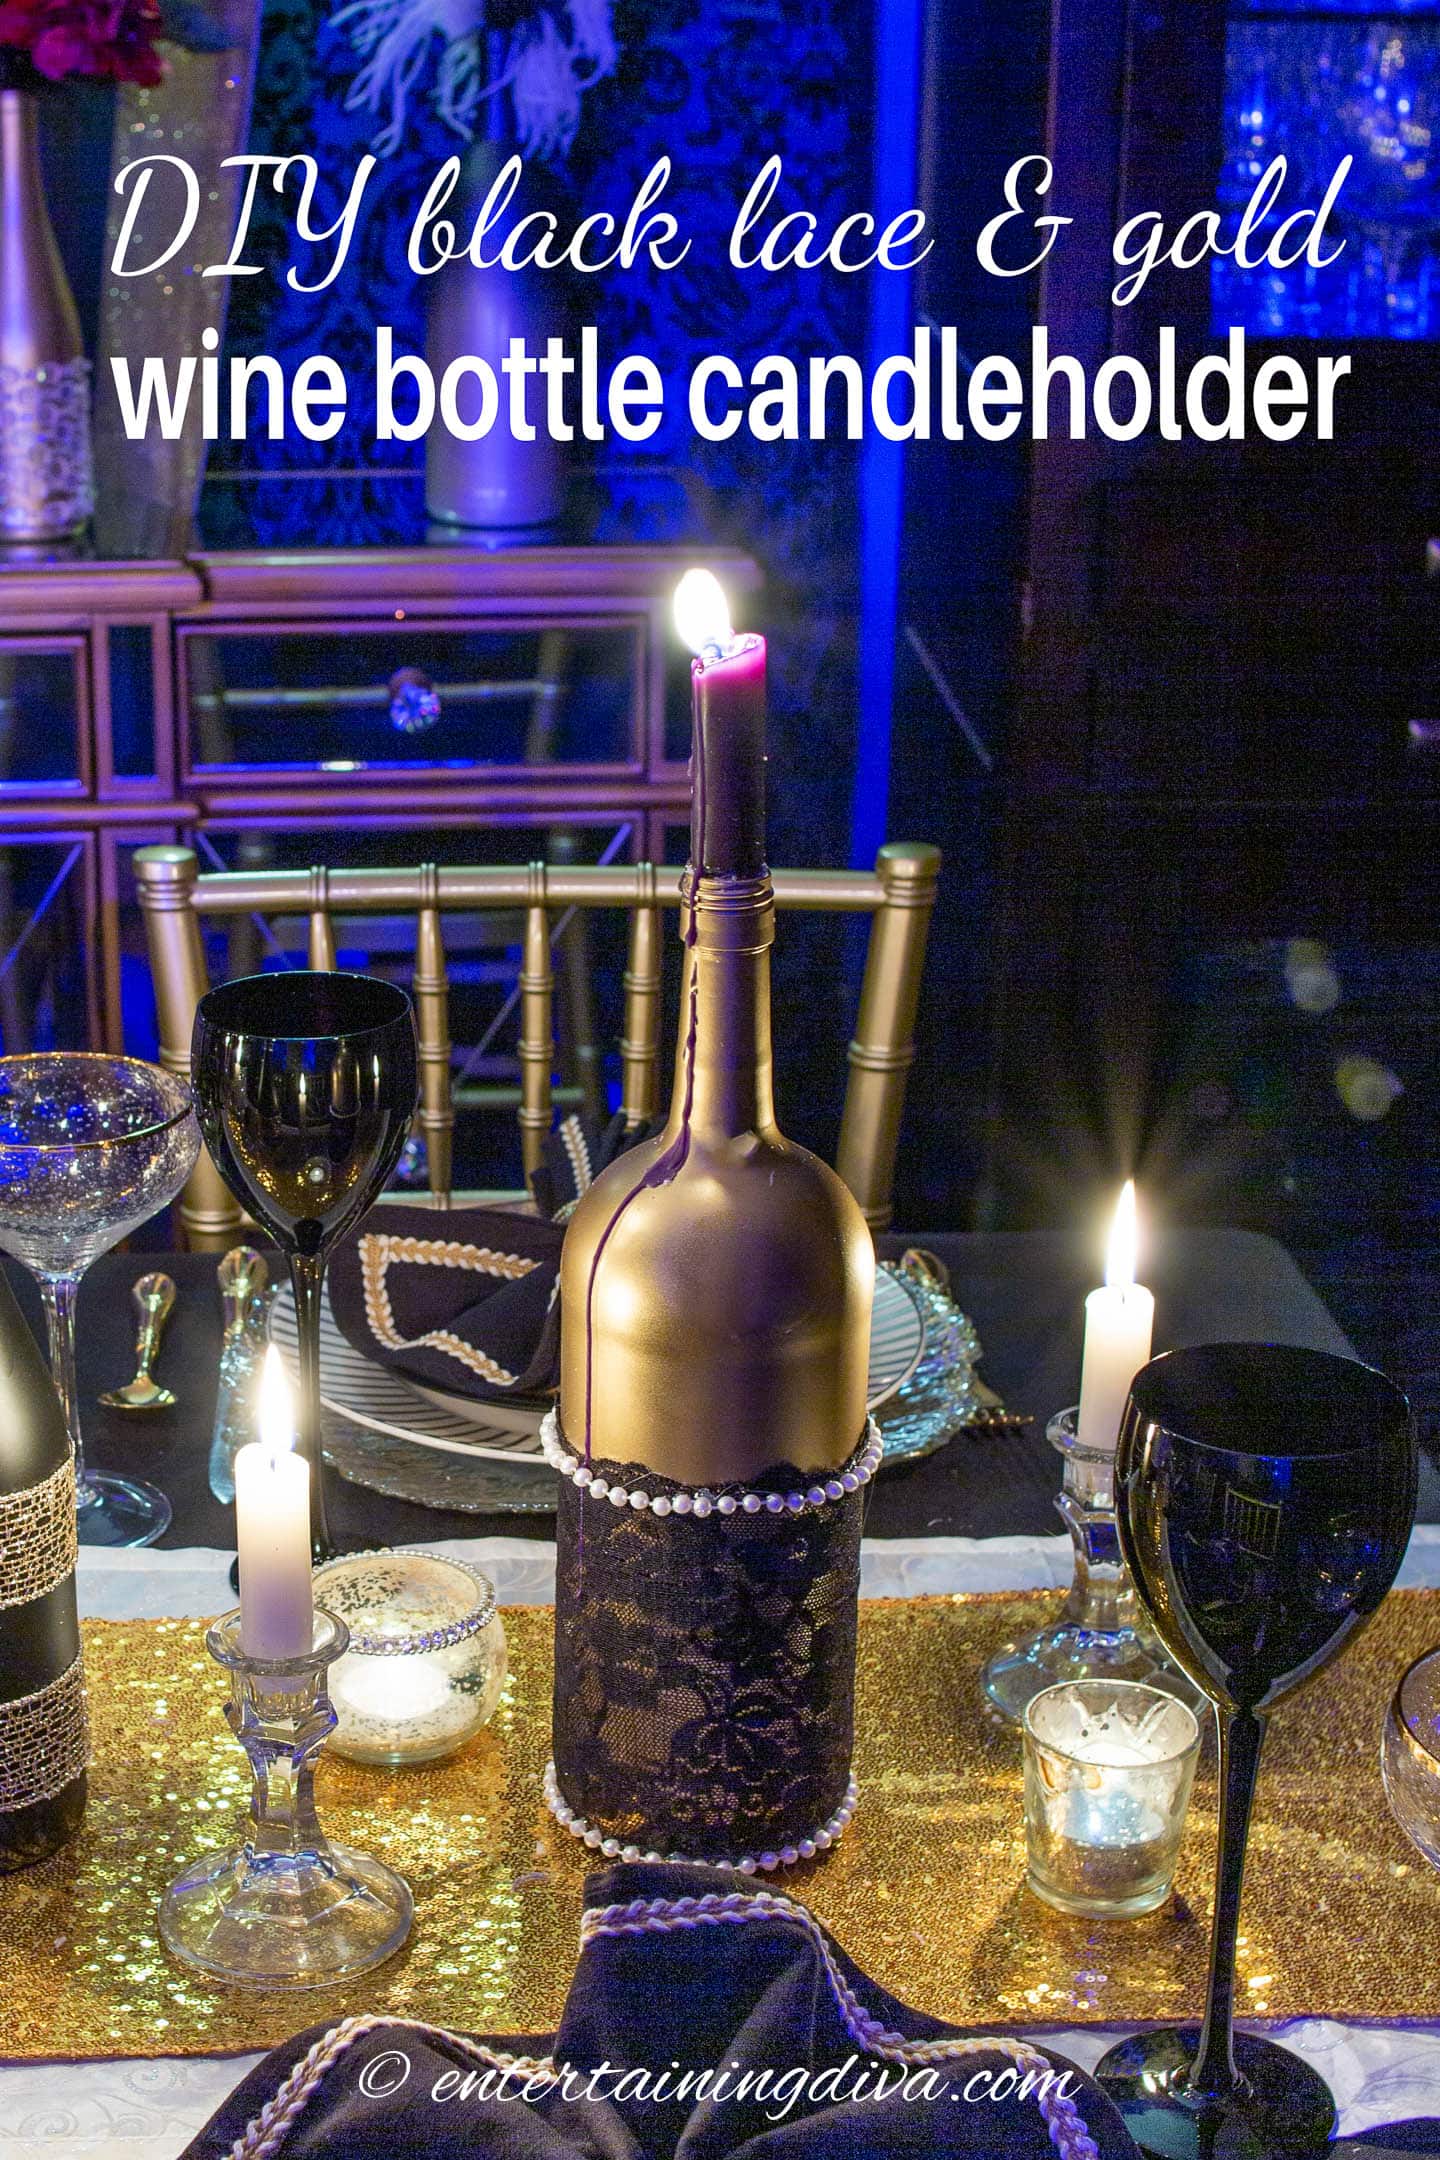 DIY gold wine bottle with black lace and pearls used as a candle holder for a table centerpiece